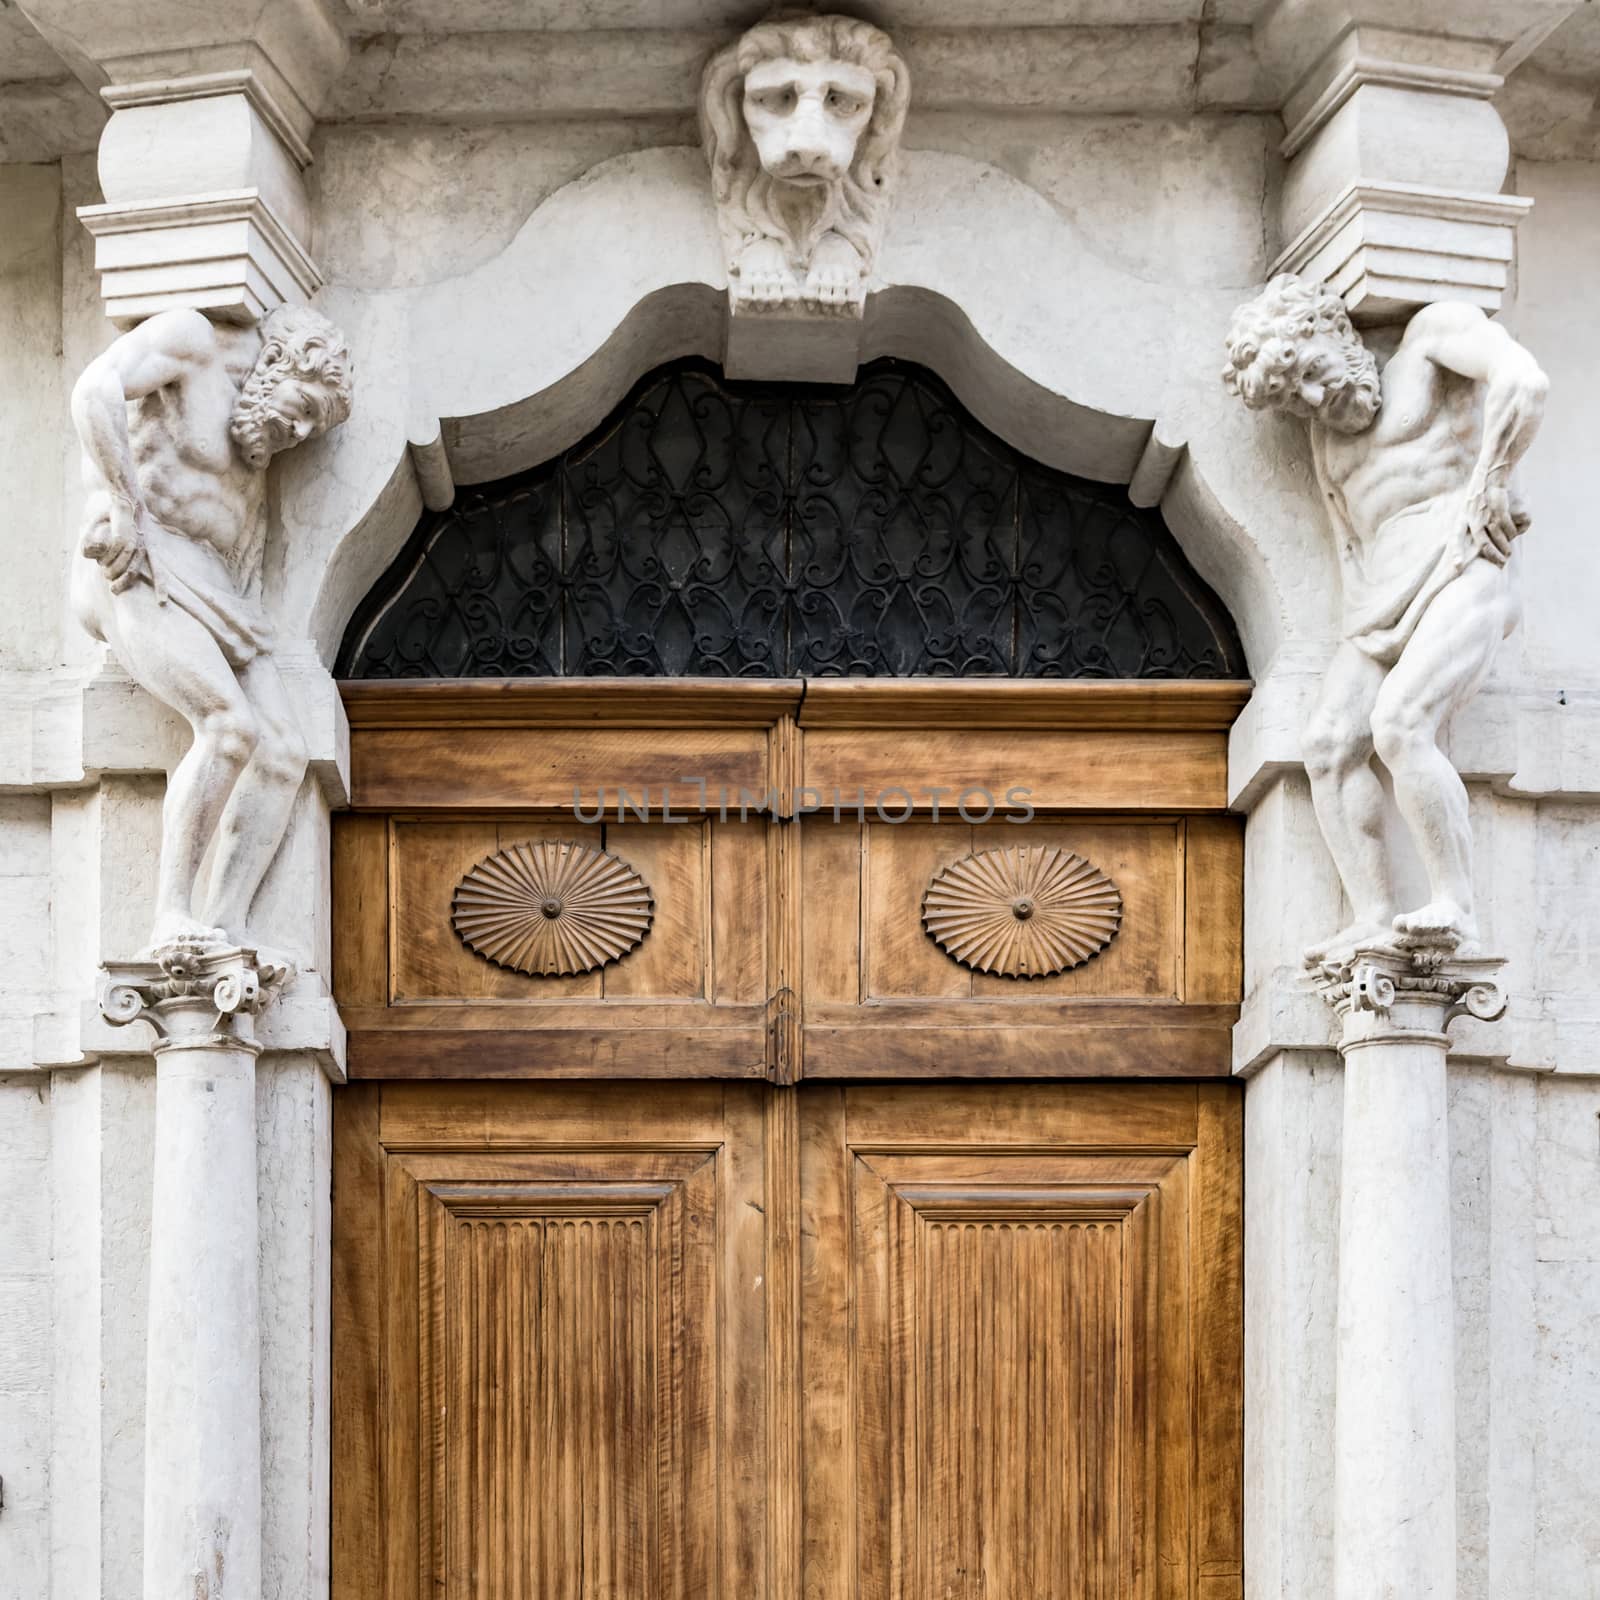 Old white stone entrance with statues and wooden portal. by Isaac74